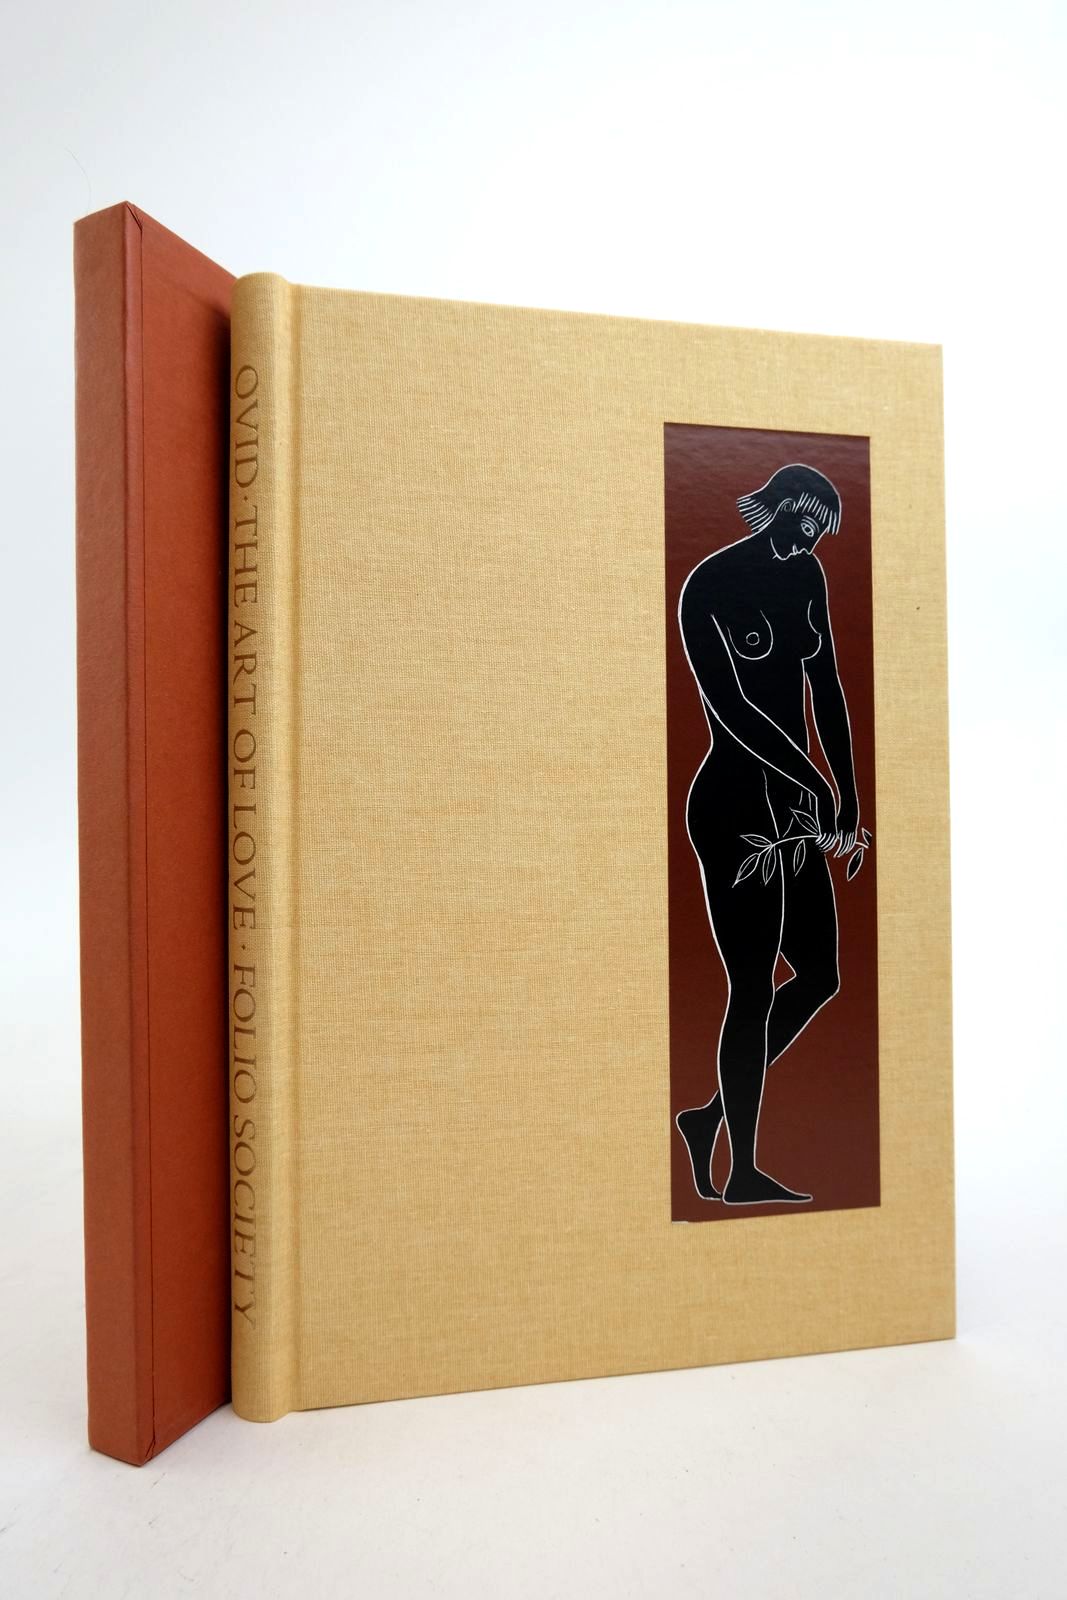 Photo of THE ART OF LOVE written by Ovid,  Naso, Publius Ovidius Michie, James illustrated by Baker, Grahame published by Folio Society (STOCK CODE: 2140157)  for sale by Stella & Rose's Books